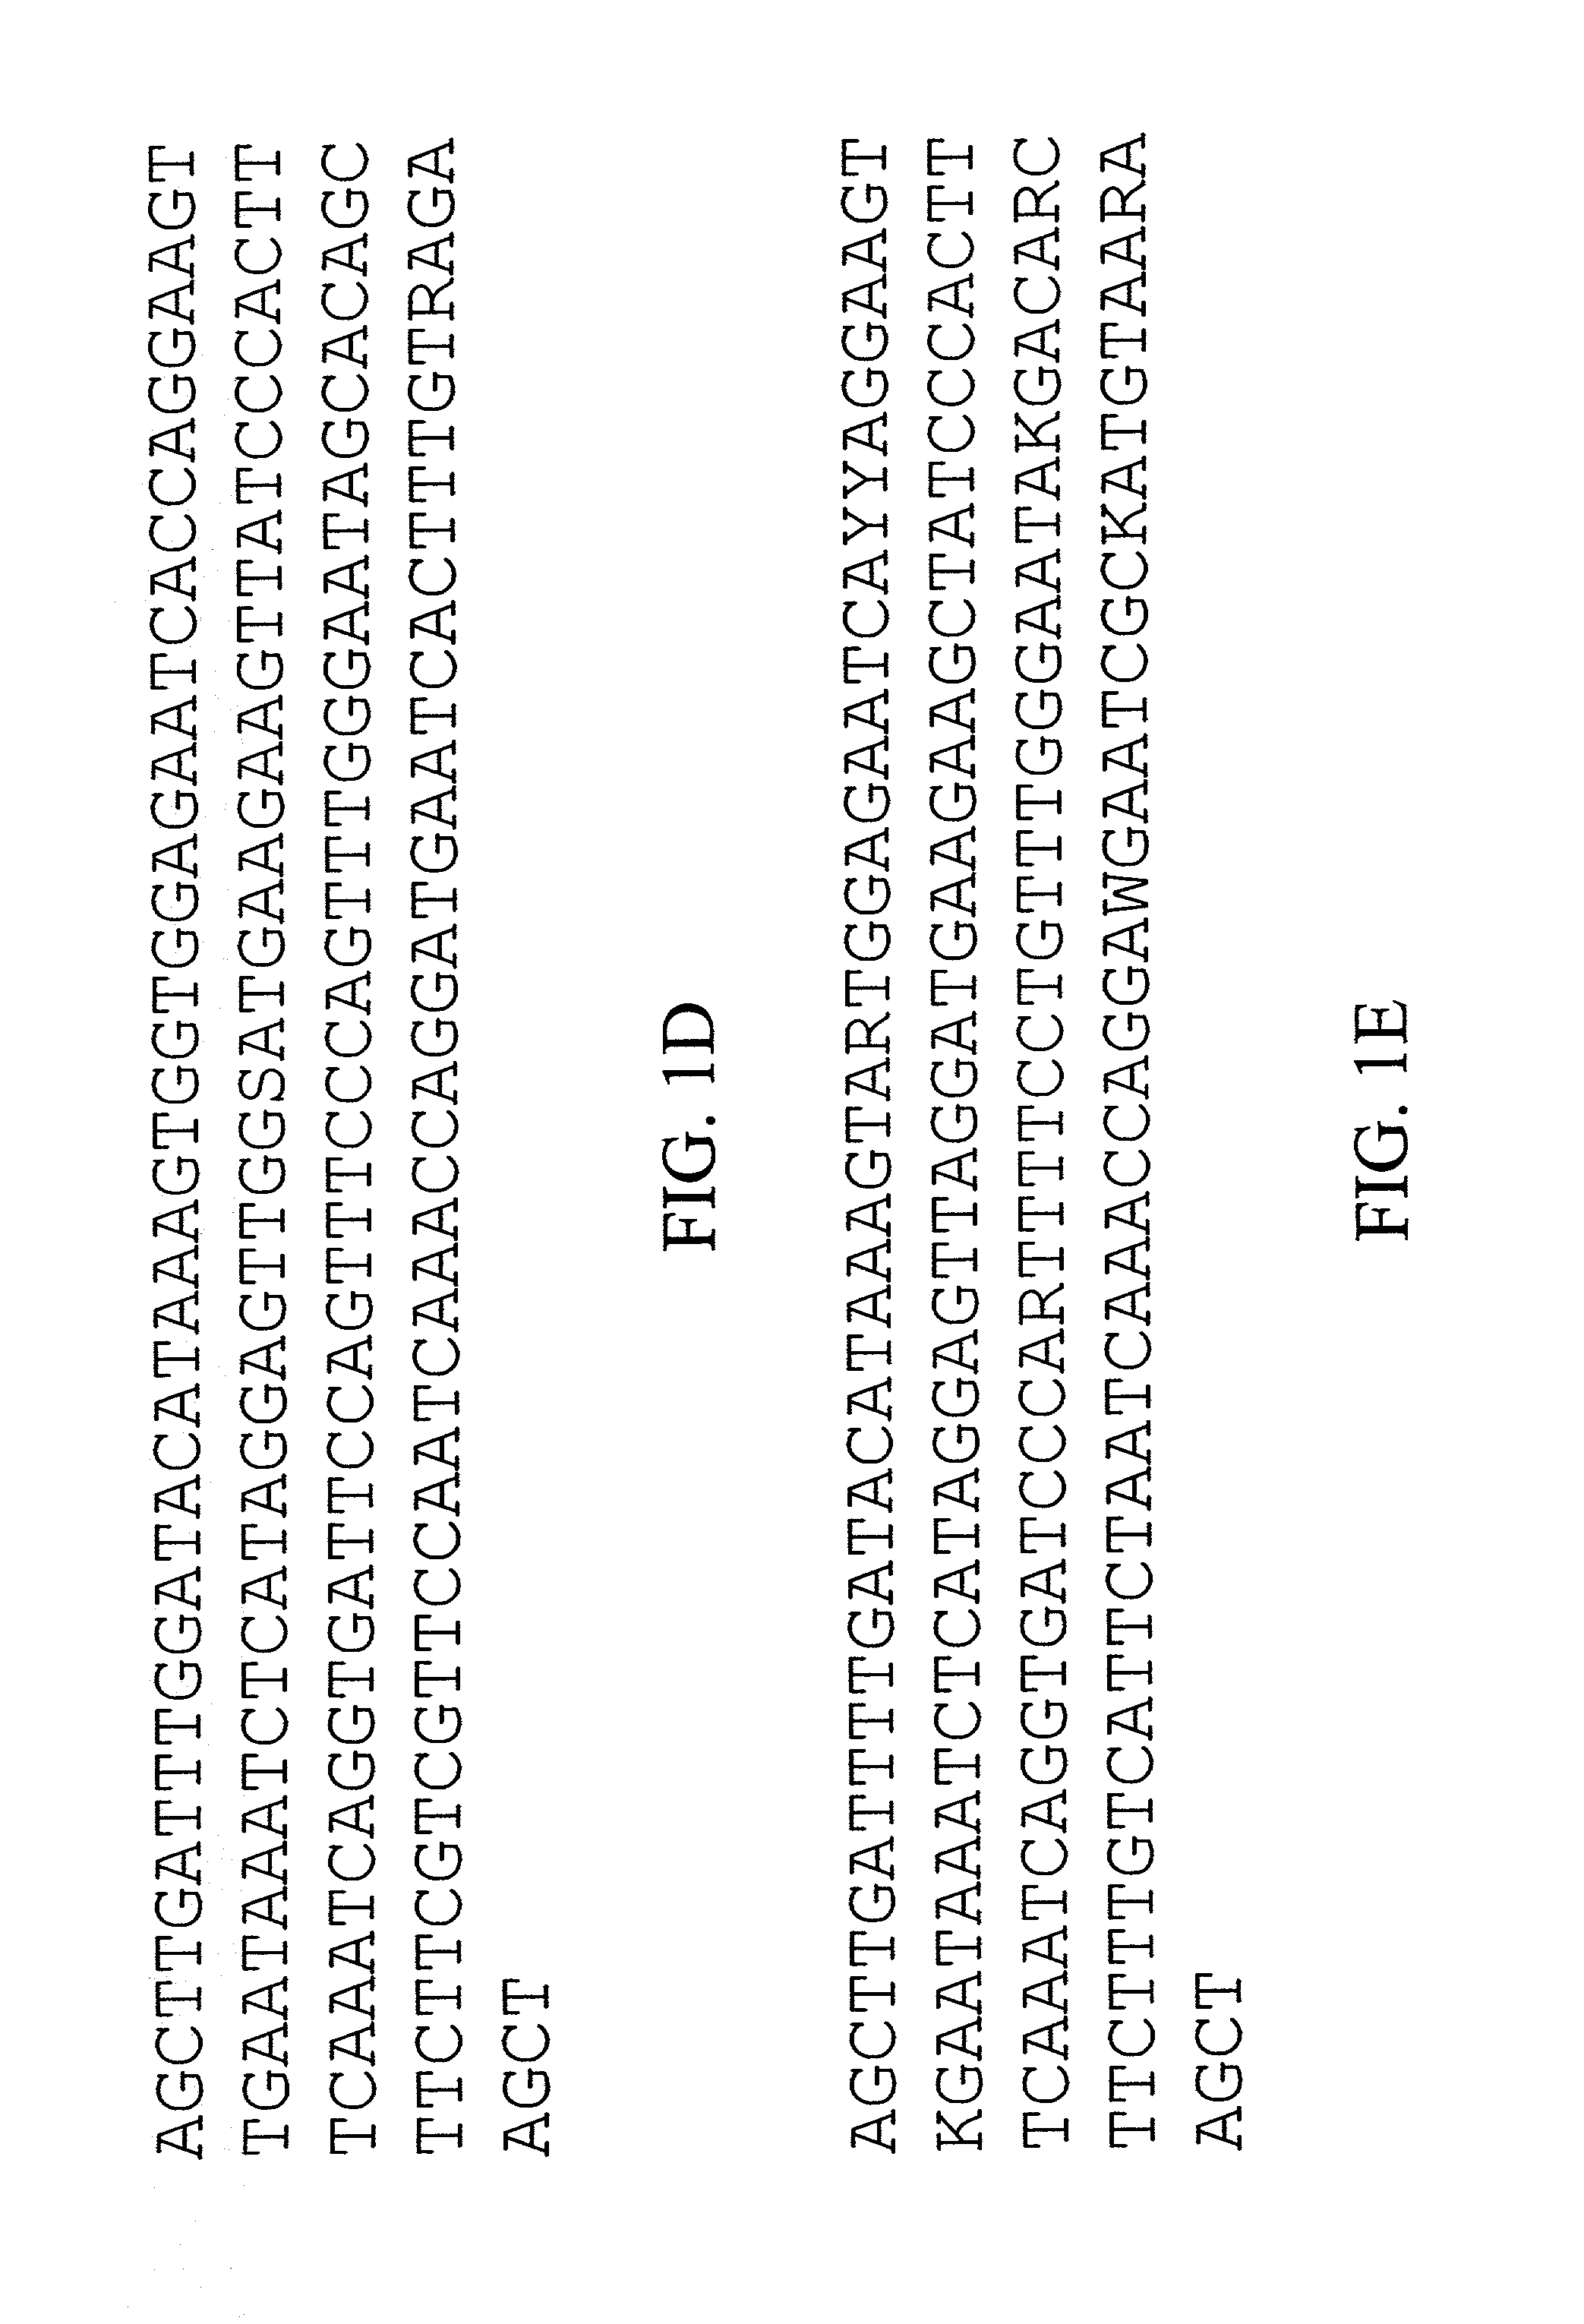 Methods for generating or increasing revenues from crops